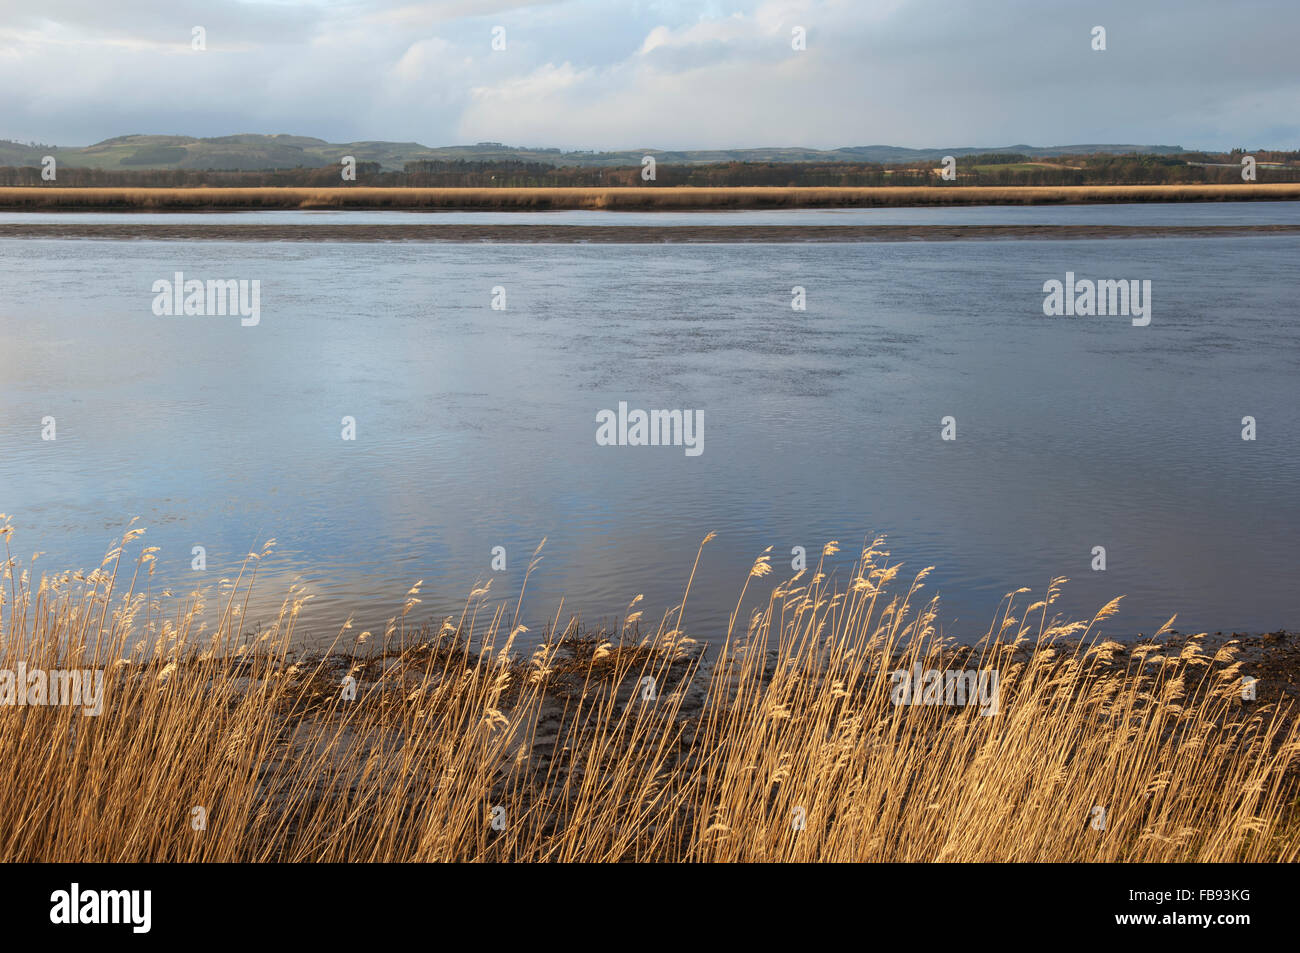 The Firth of Tay at Newburgh in Fife, Scotland. Stock Photo